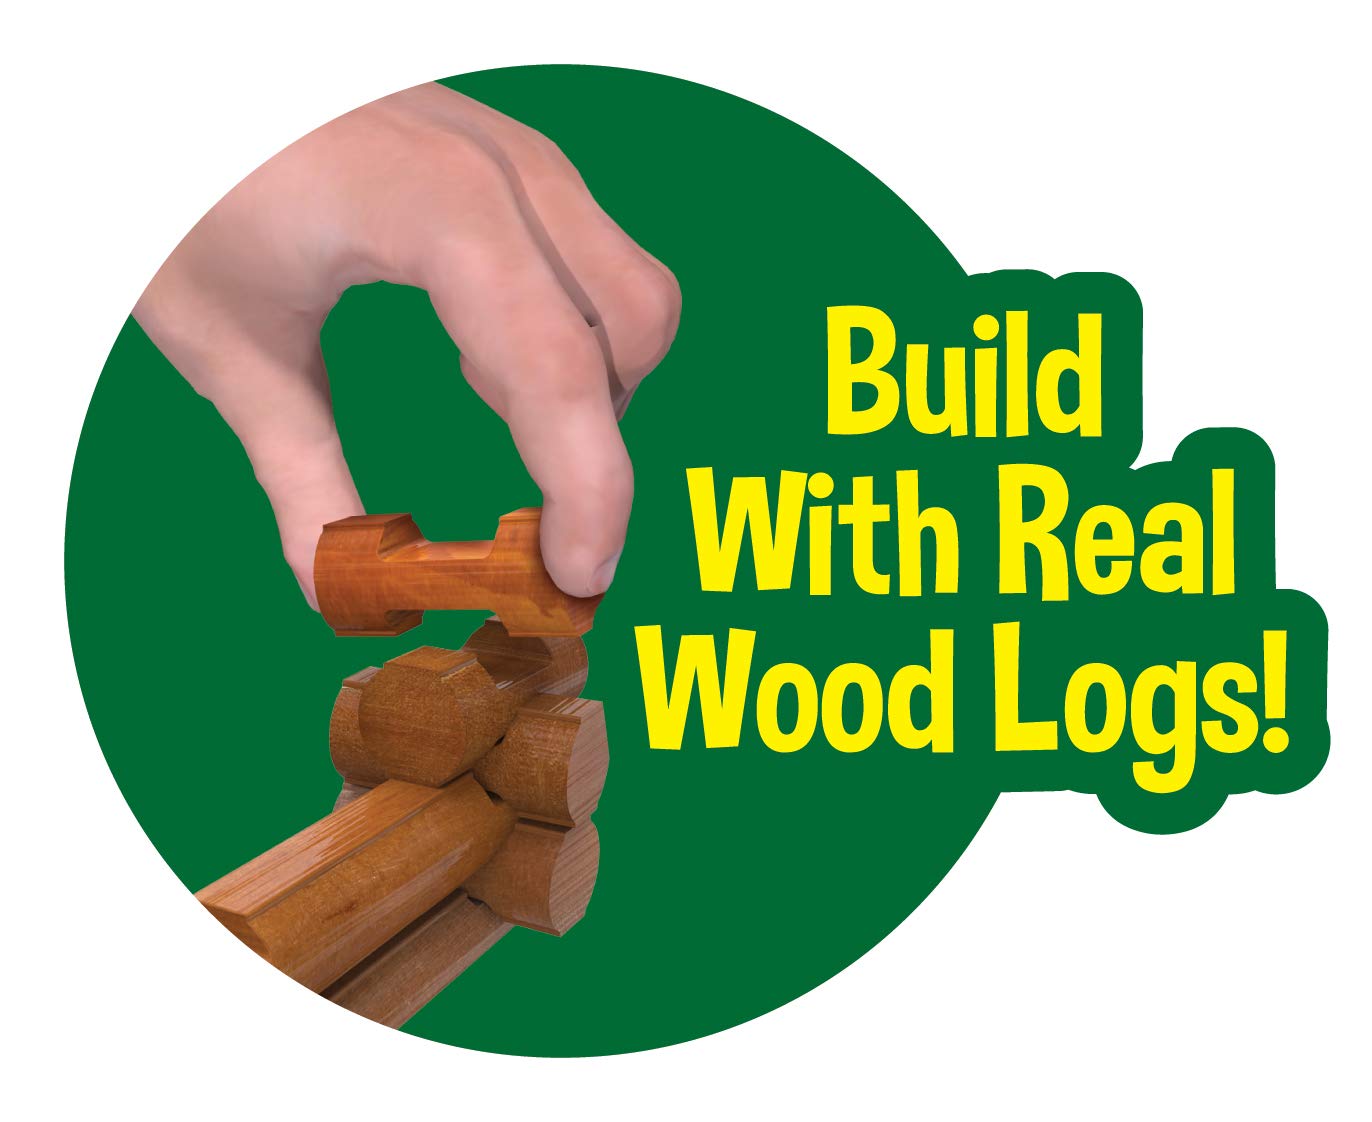 LINCOLN LOGS – Classic Farmhouse, 268 Pieces, Real Wood Logs - Ages 3+ - Best Retro Building Gift Set for Boys/Girls - Creative Construction Engineering - Preschool Education Toy